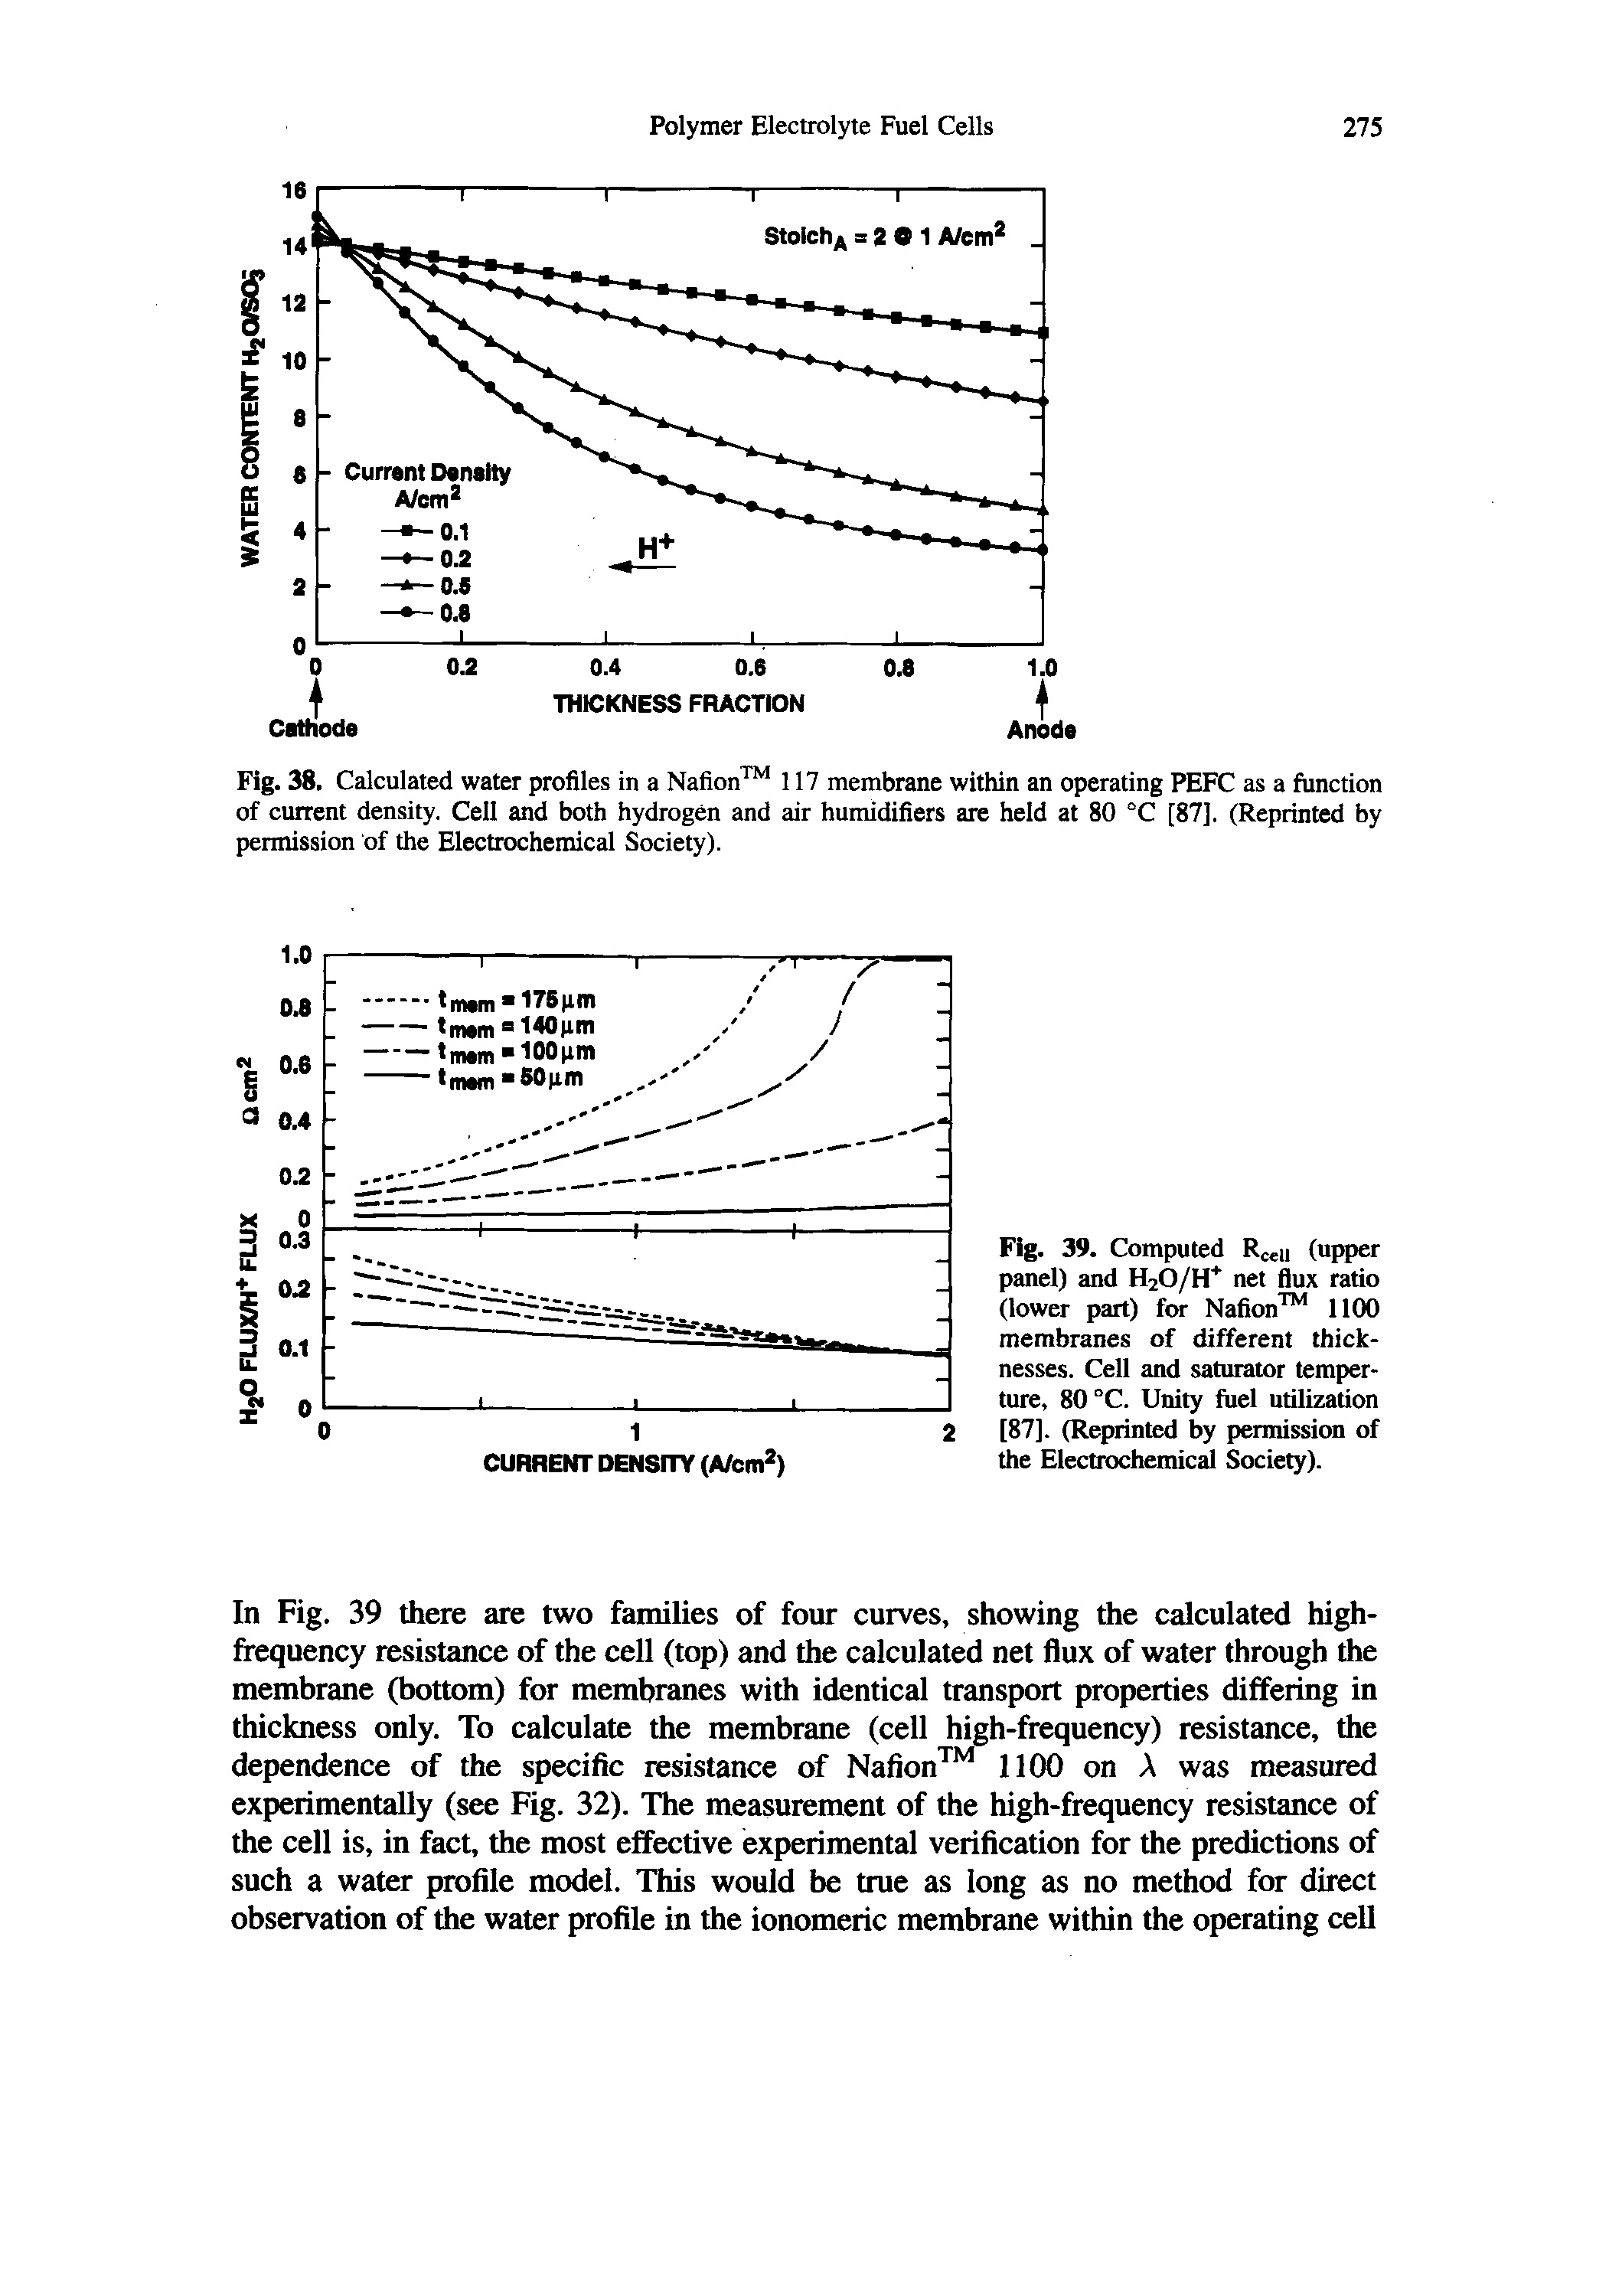 Fig. 39. Computed Rceii (upper panel) and H O/H net flux ratio (lower part) for Nafion 1100 membranes of different thicknesses. Cell and saturator temper-ture, 80 °C. Unity fuel utilization [87]. (Reprinted by permission of the Electrochemical Society).